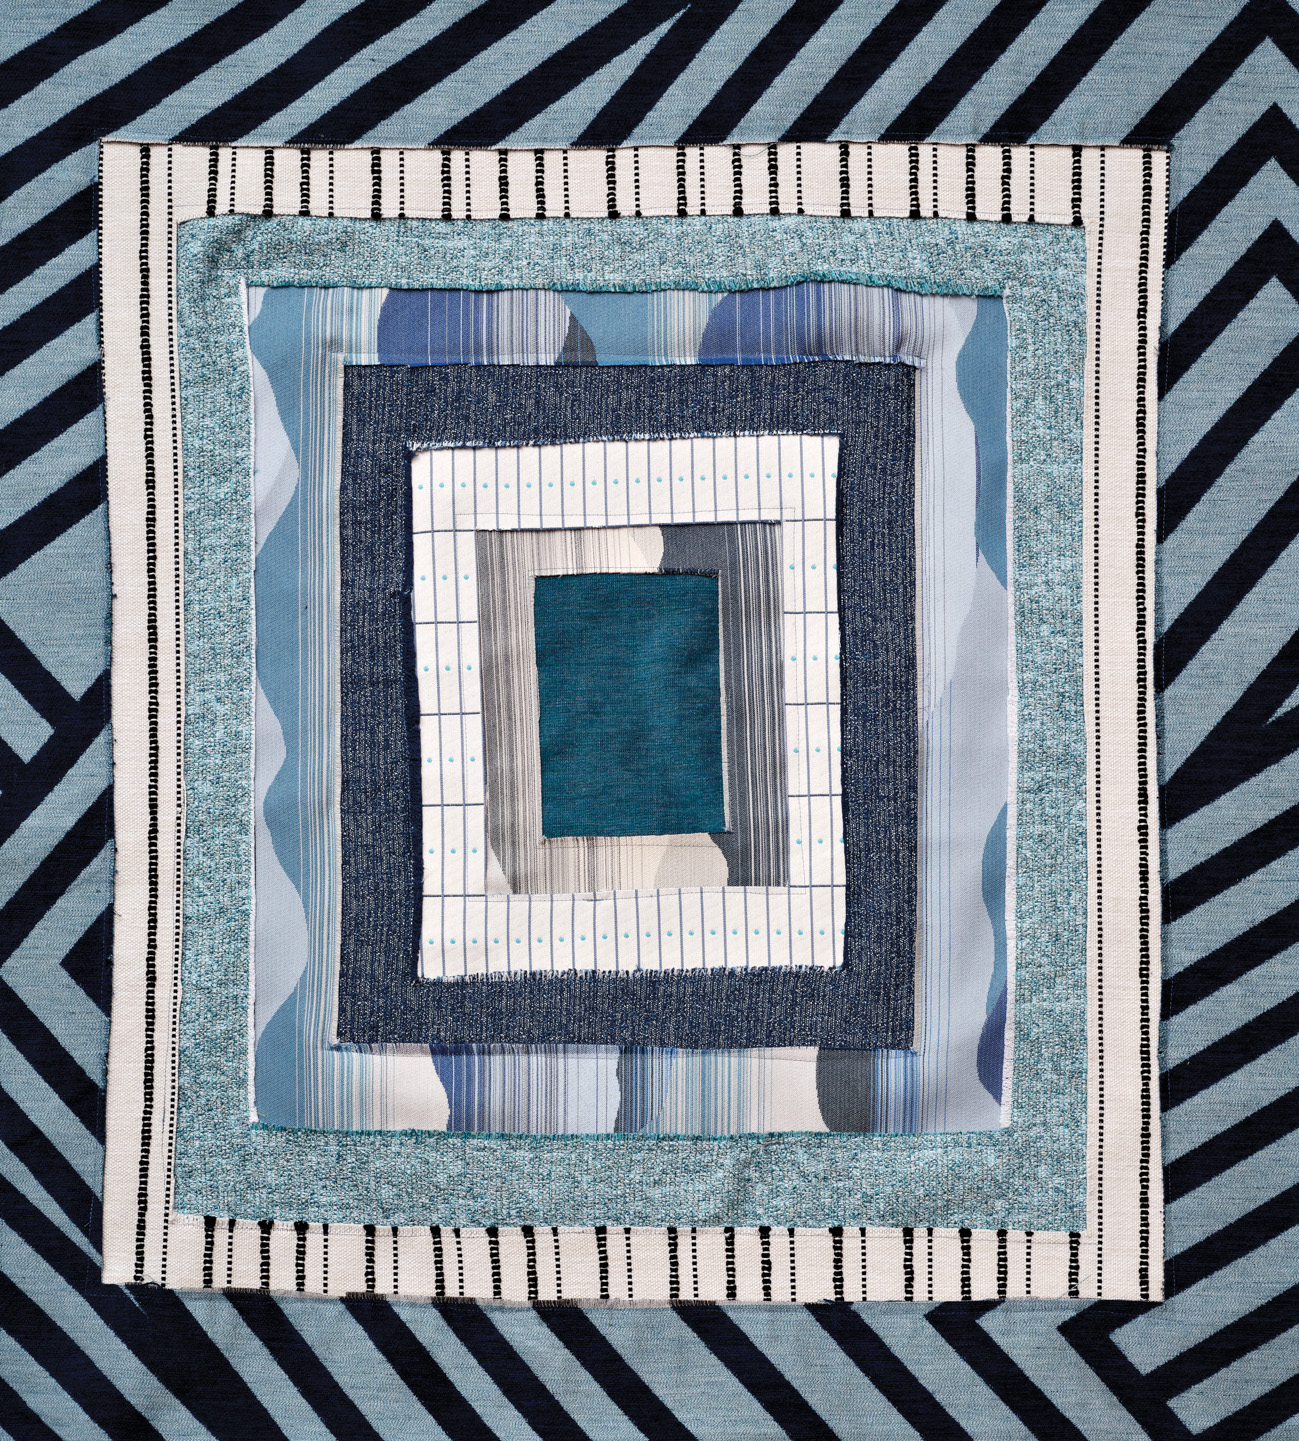 Part of Liz Collins x Pollack fabric collection, multiple blue squares all neatly stacked together